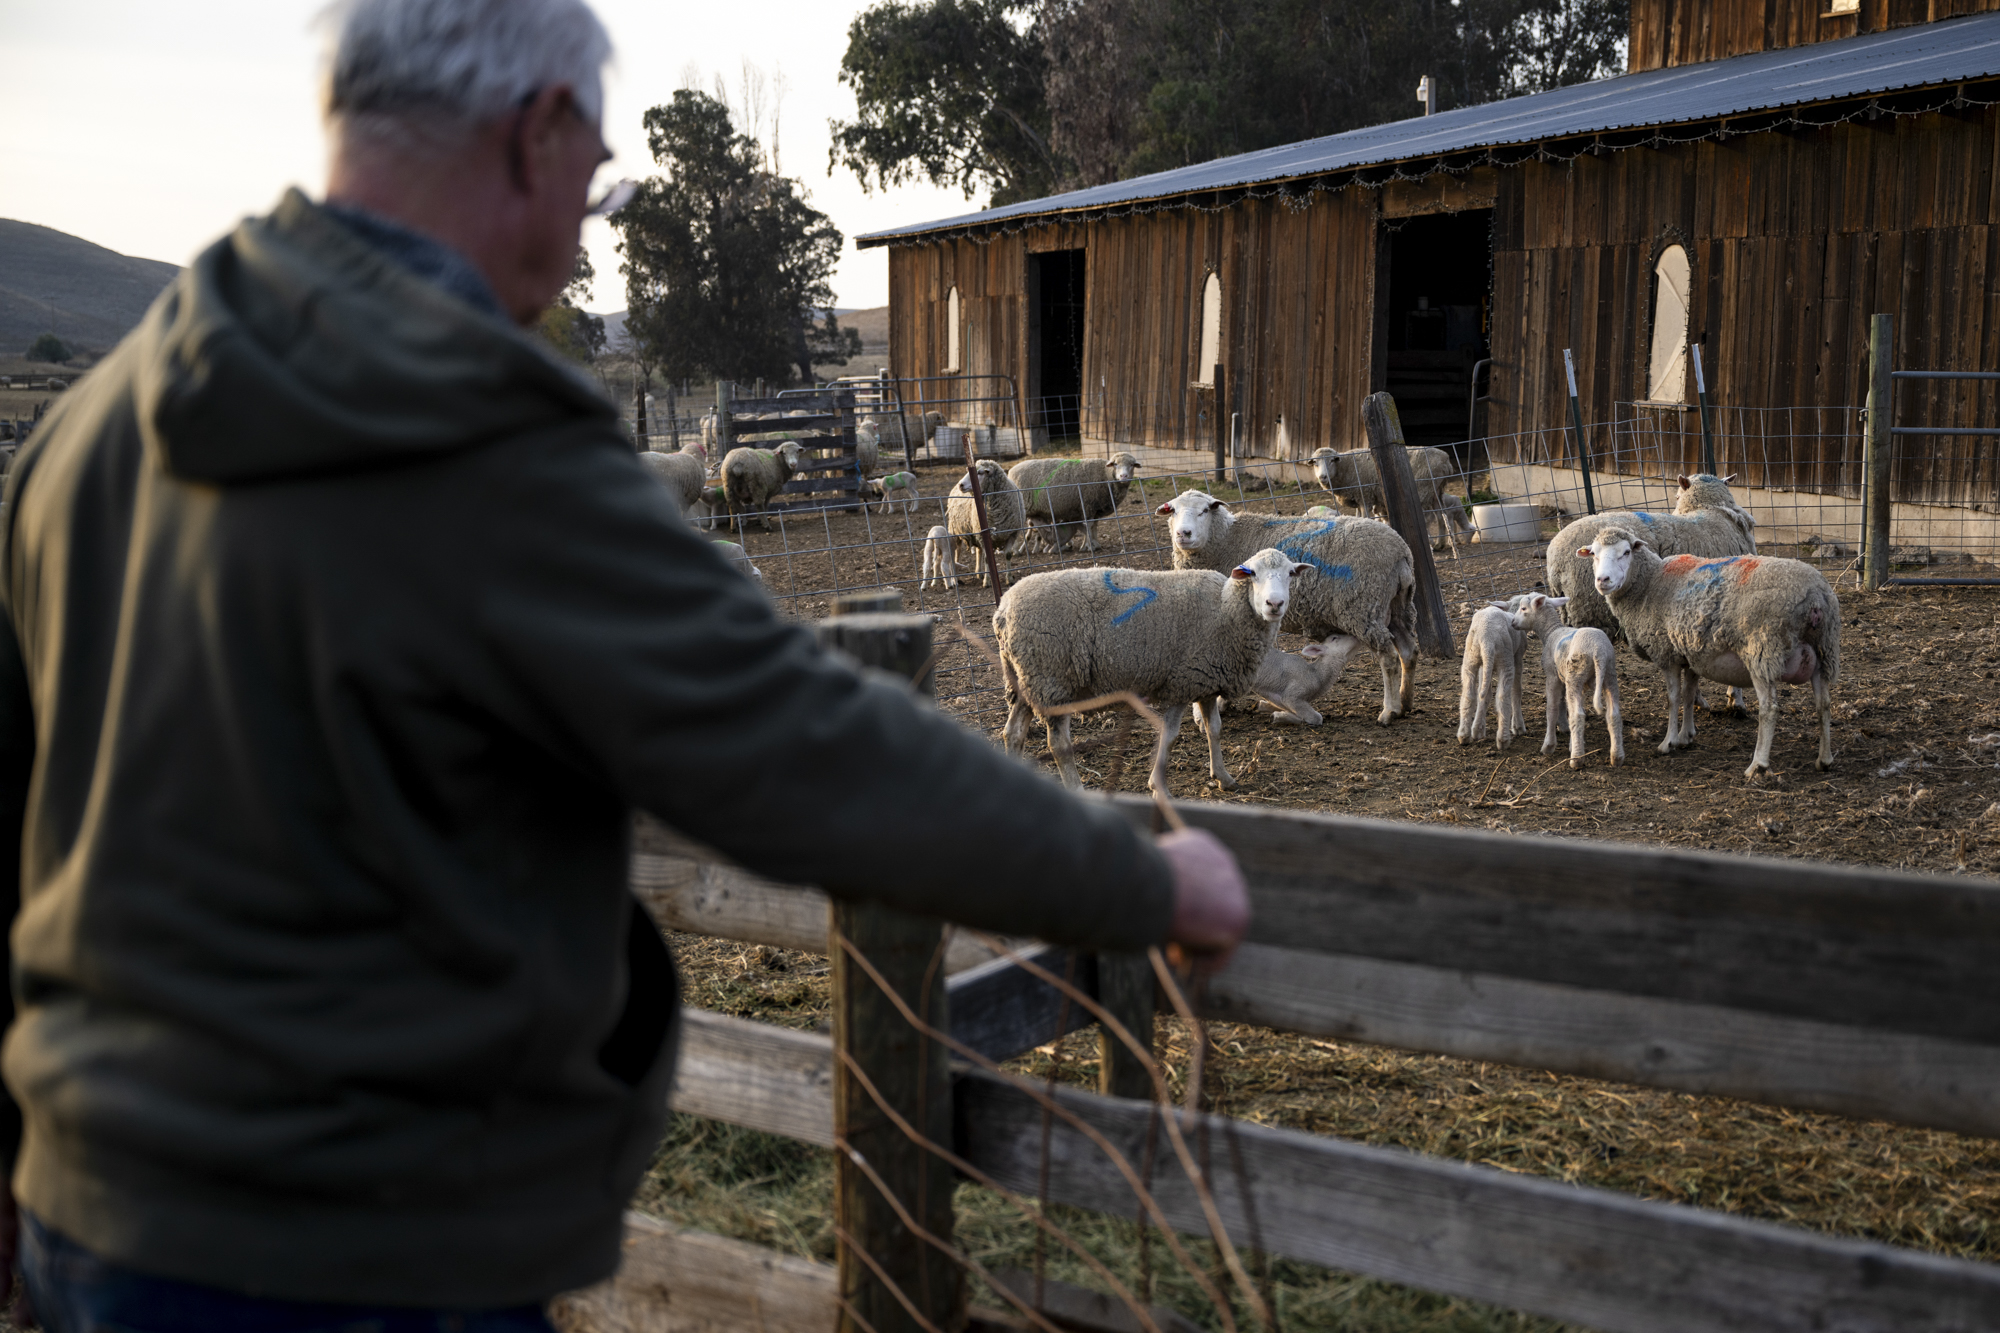 An older white man seen from behind with sheep and a farmhouse in the background.